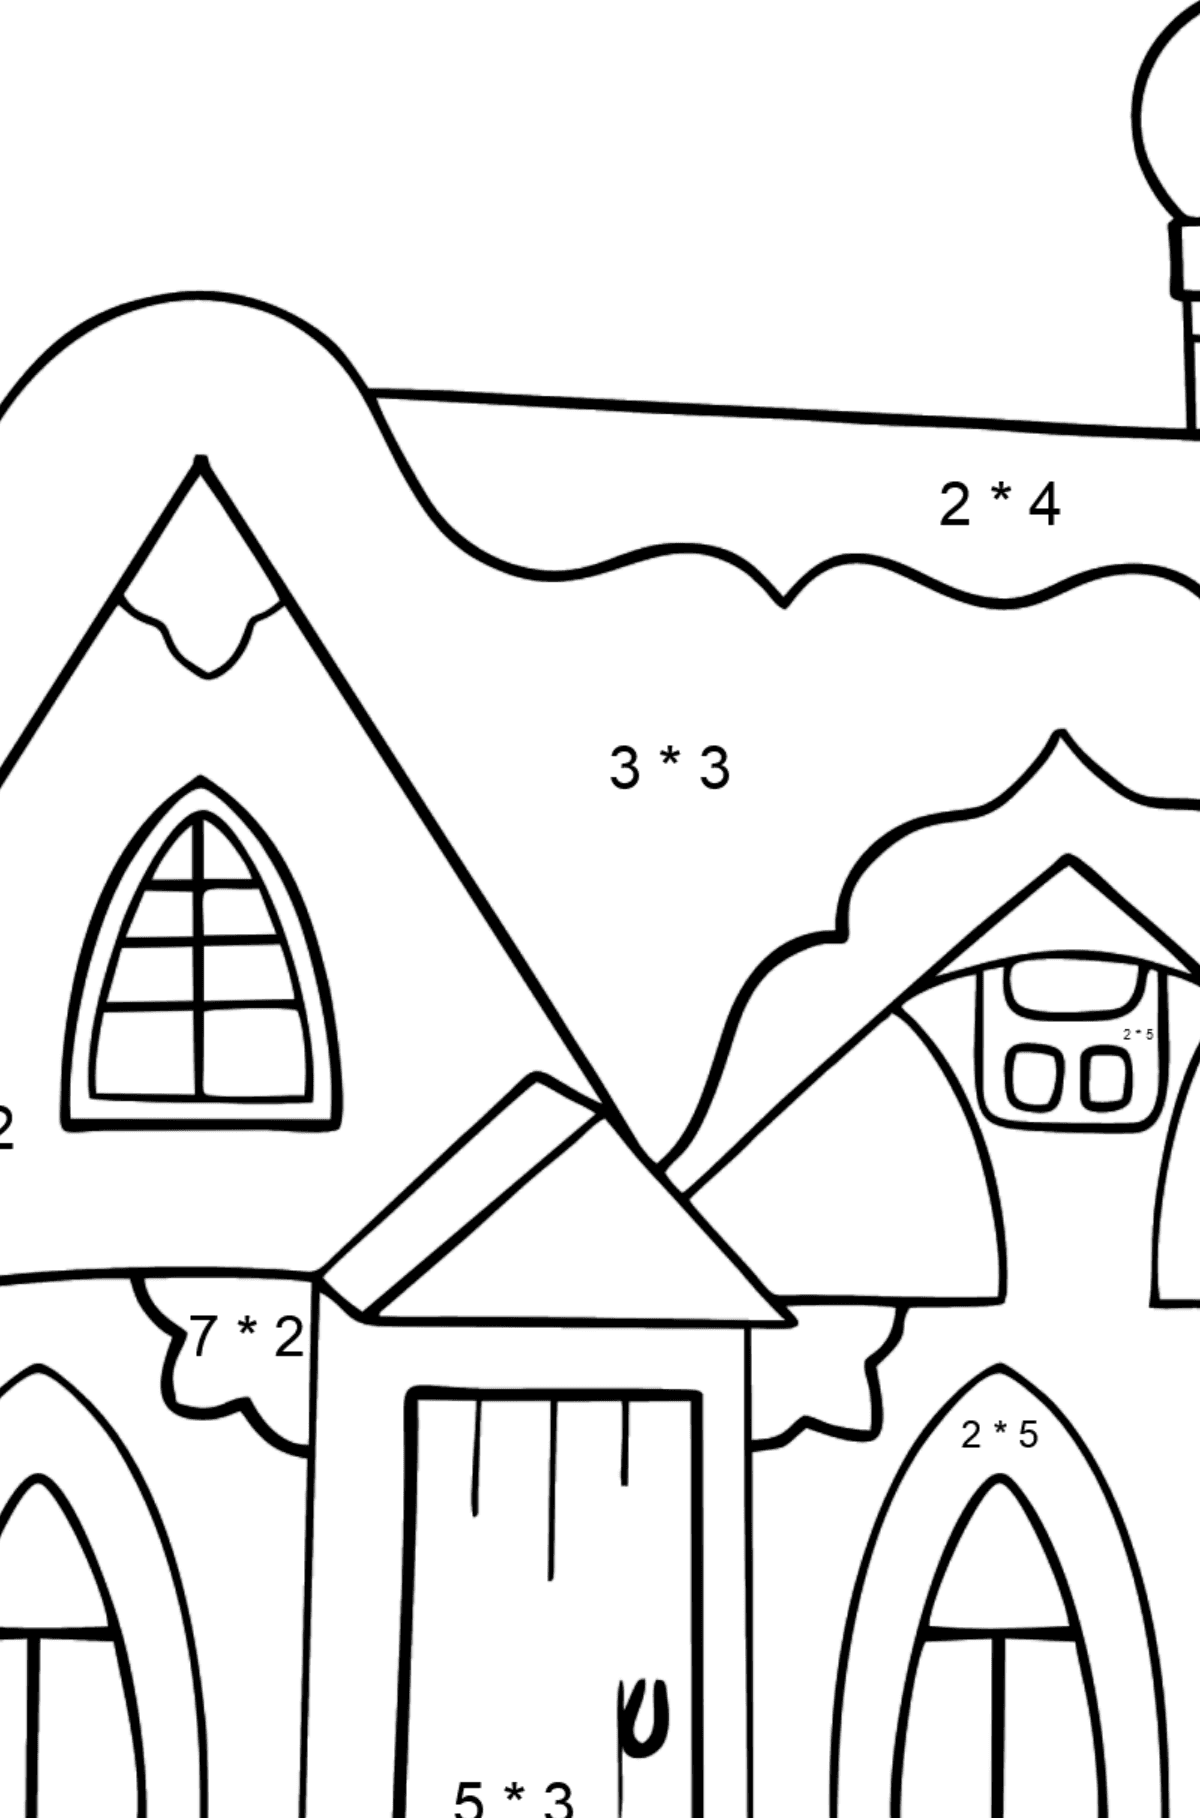 Simple Coloring Page - A Fairytale House - Math Coloring - Multiplication for Kids